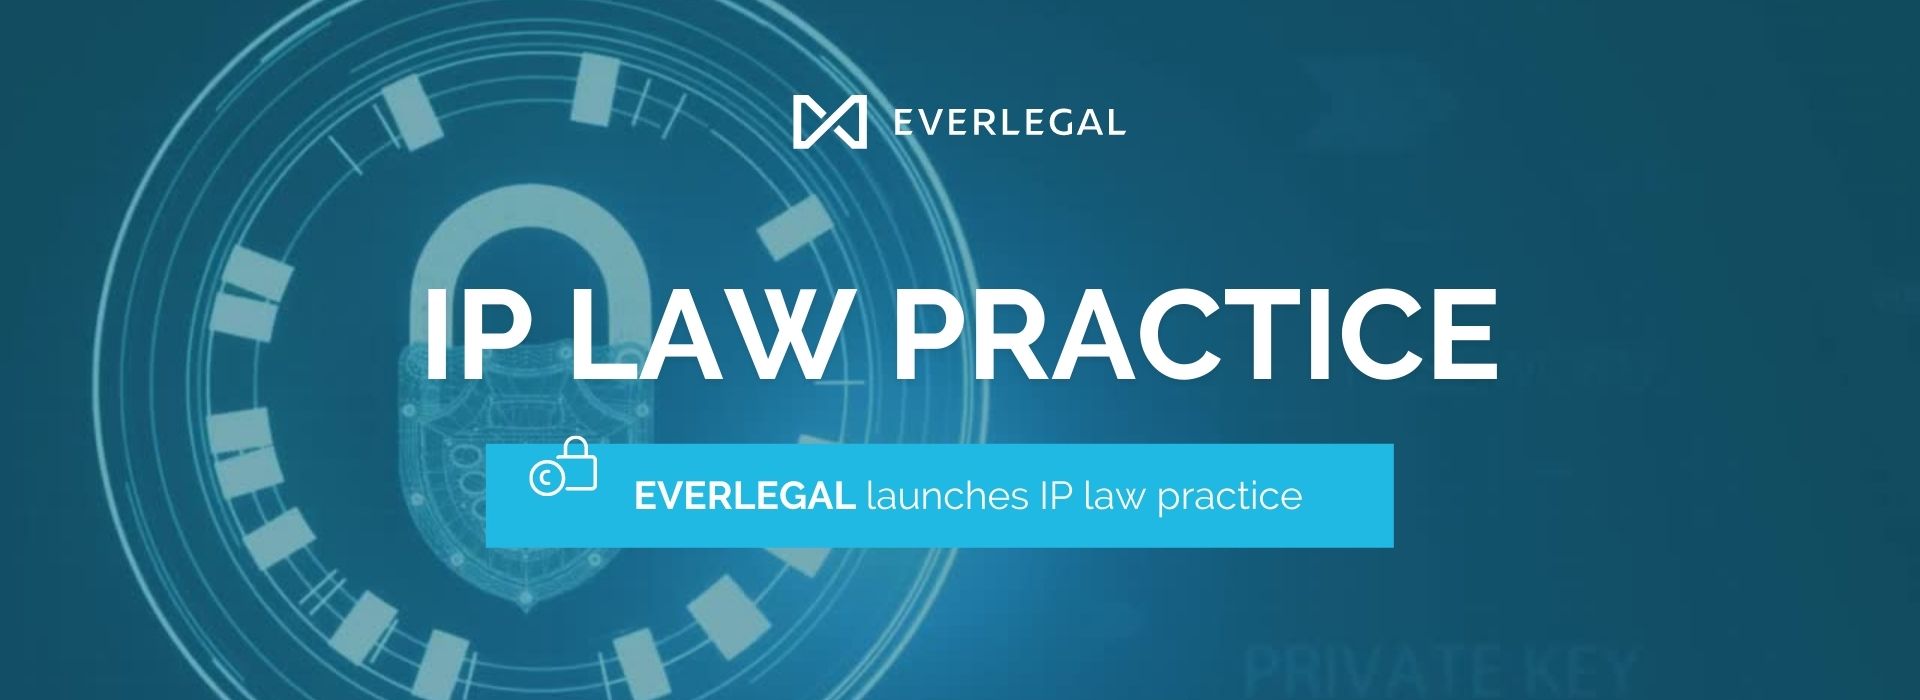 EVERLEGAL Launches IP Law Practice